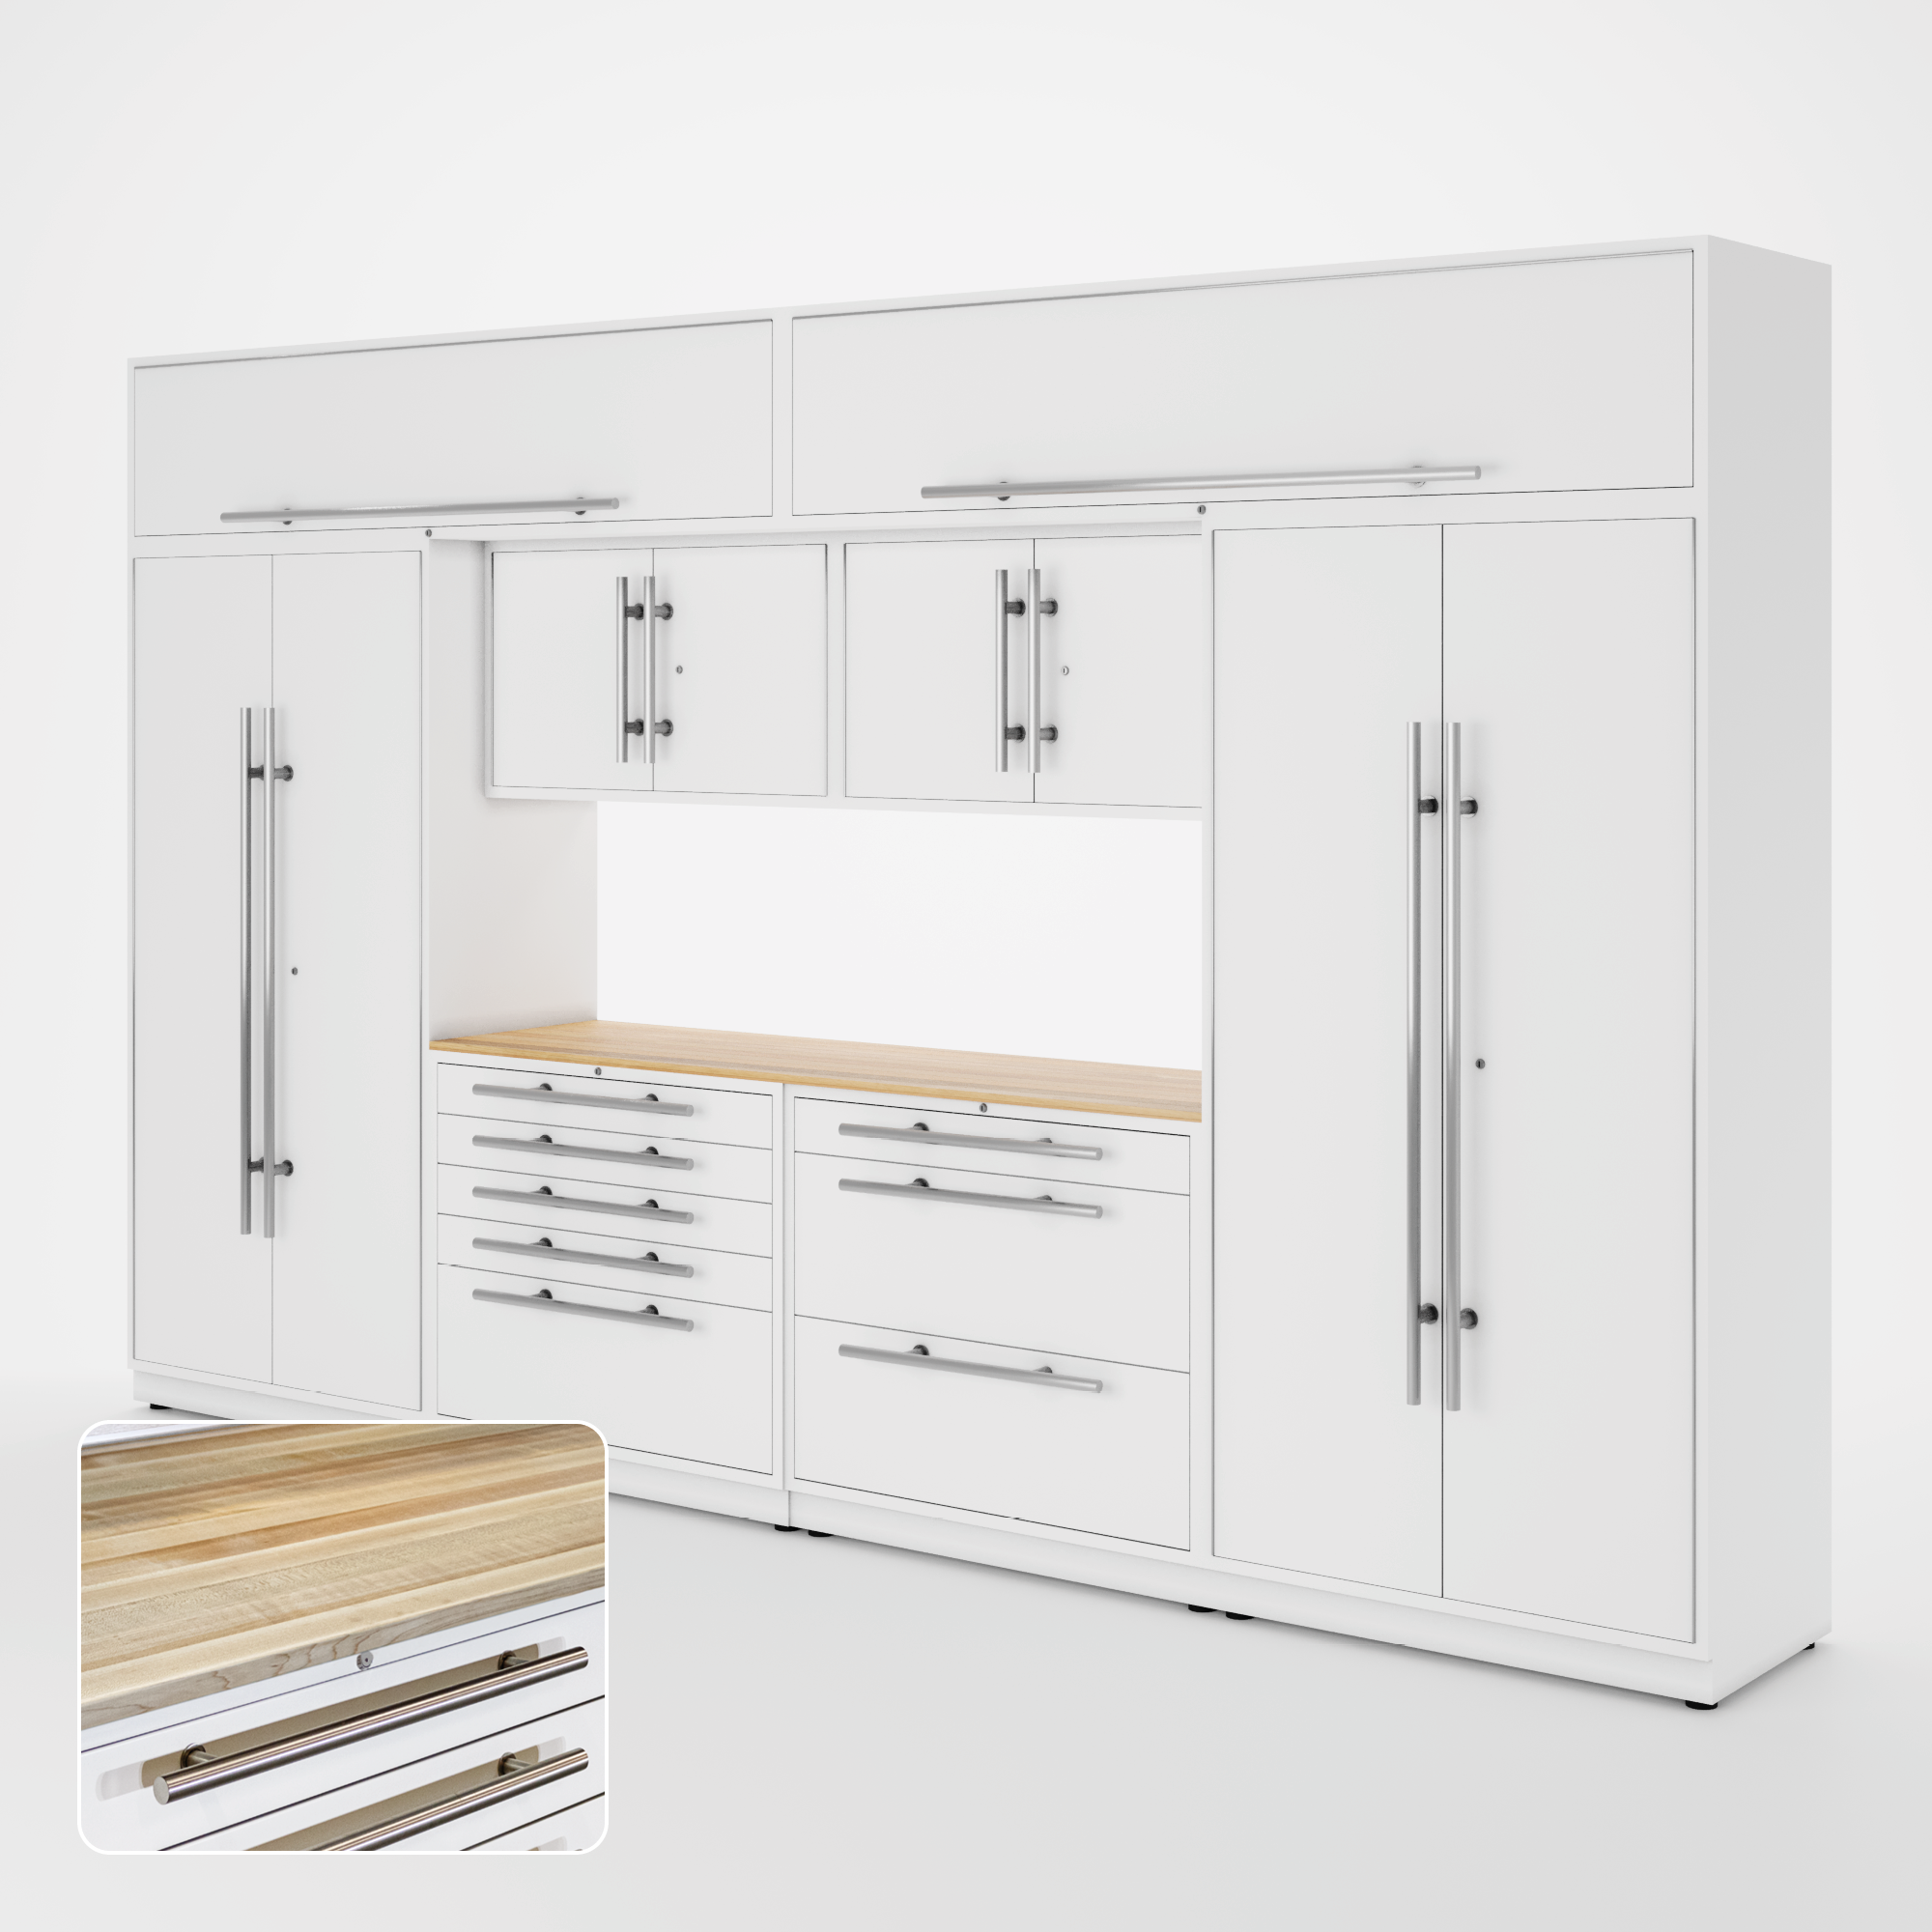 LUX Cabinets – 13 ft set – TOOL – Overheads